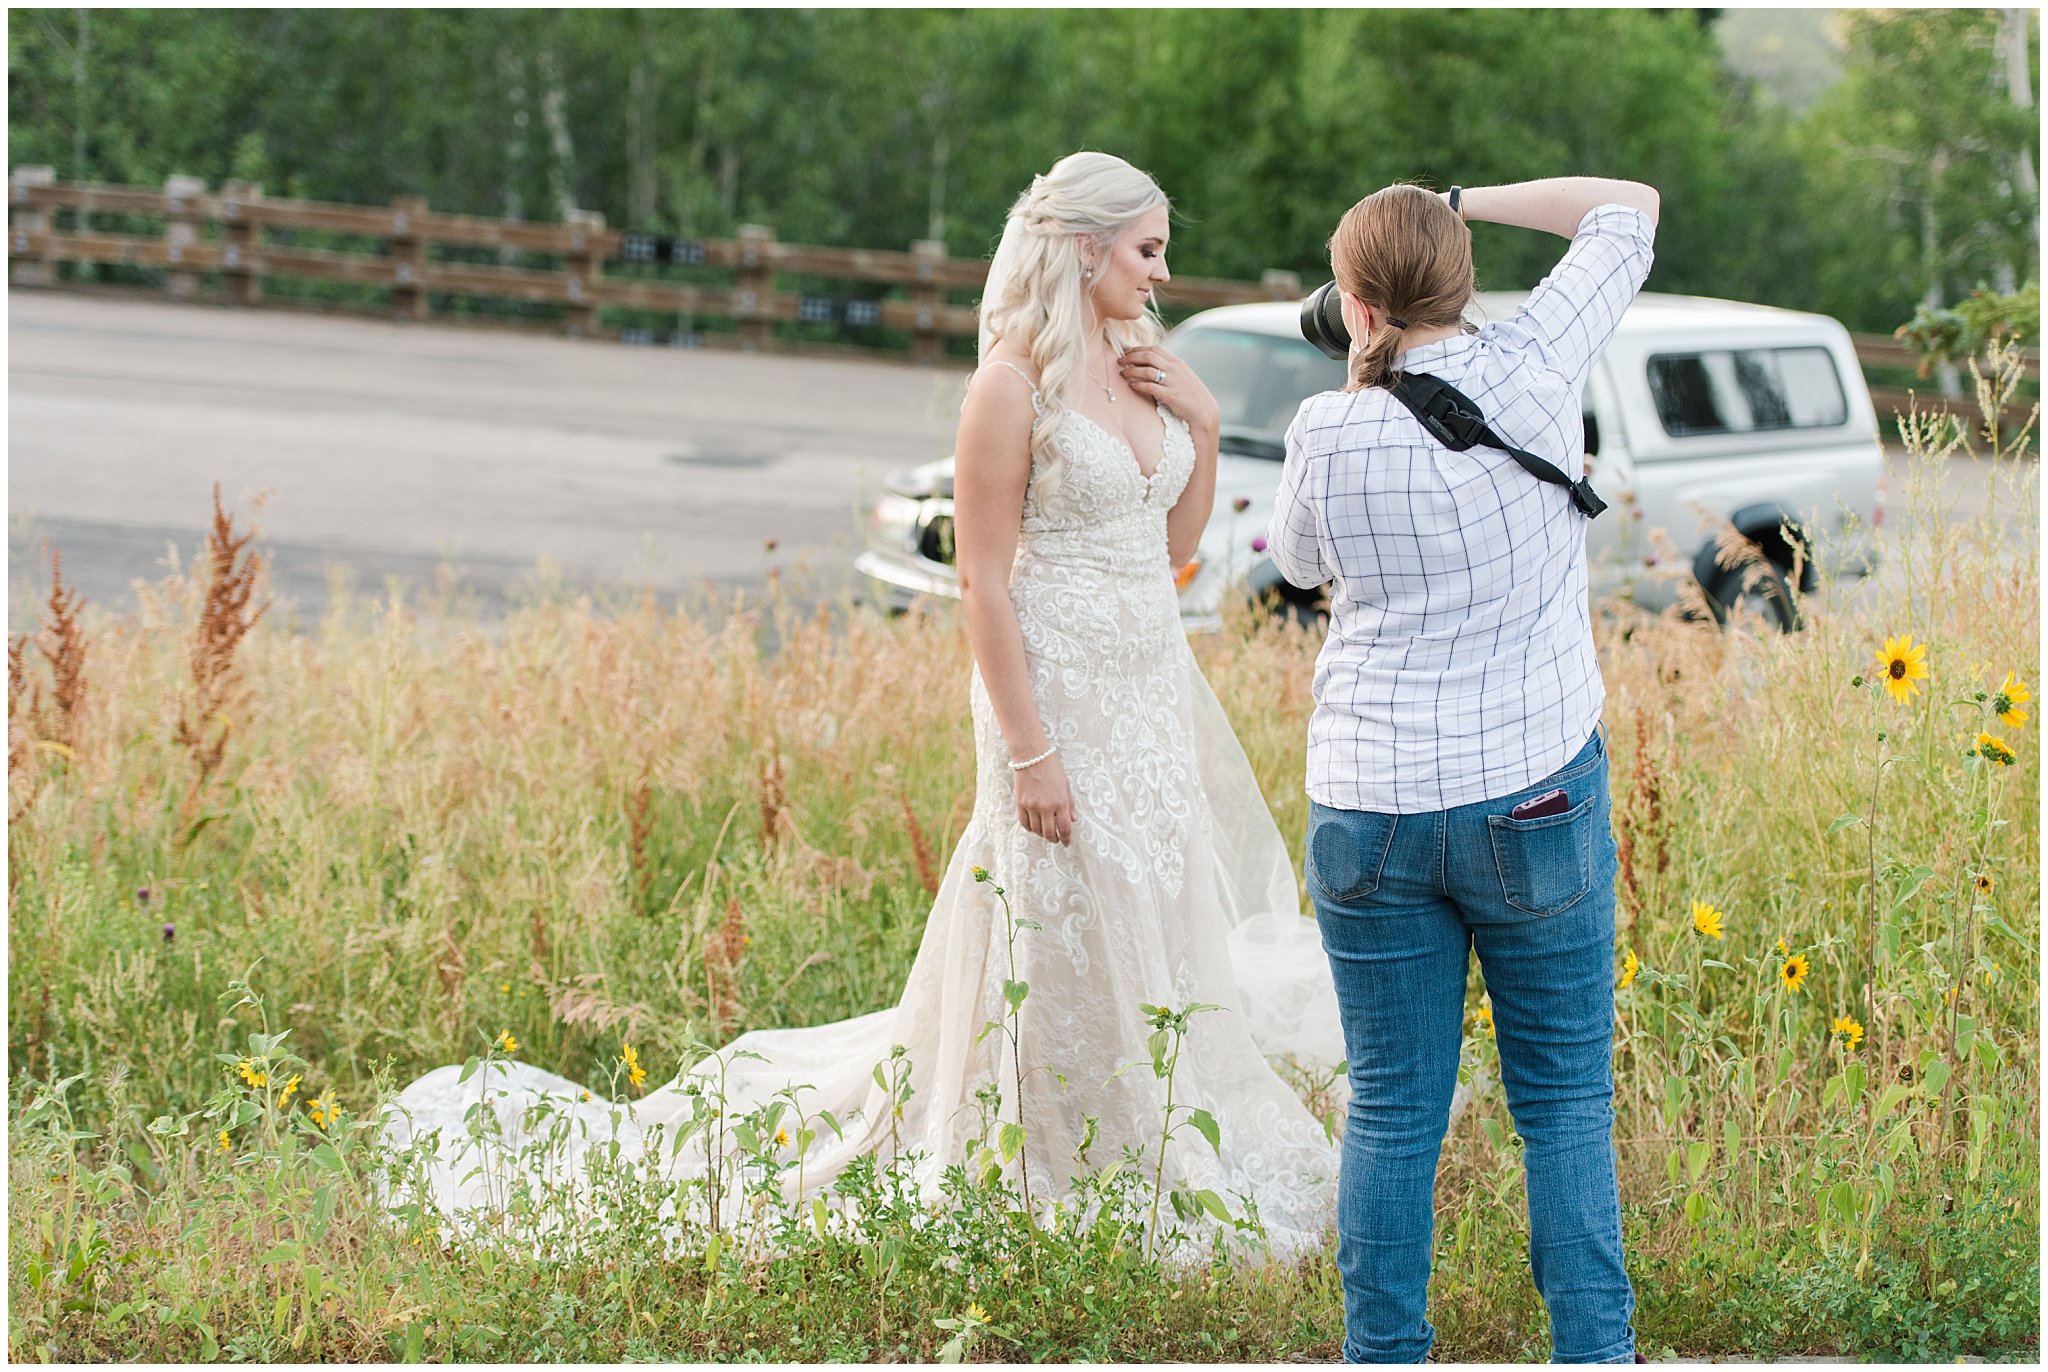 Jessie photographing a bride